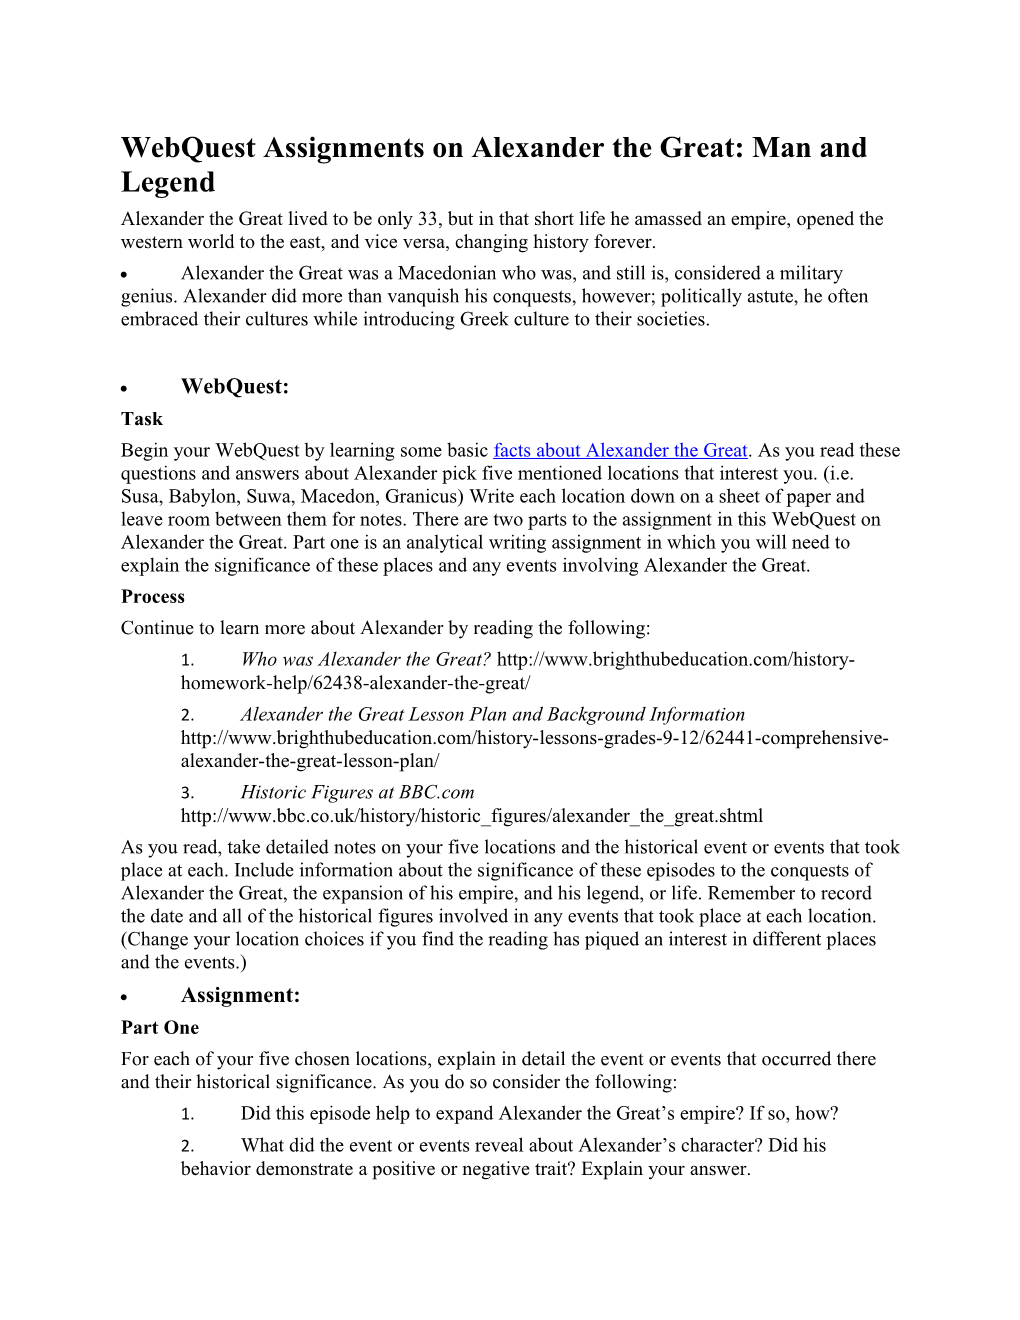 Webquest Assignments on Alexander the Great: Man and Legend